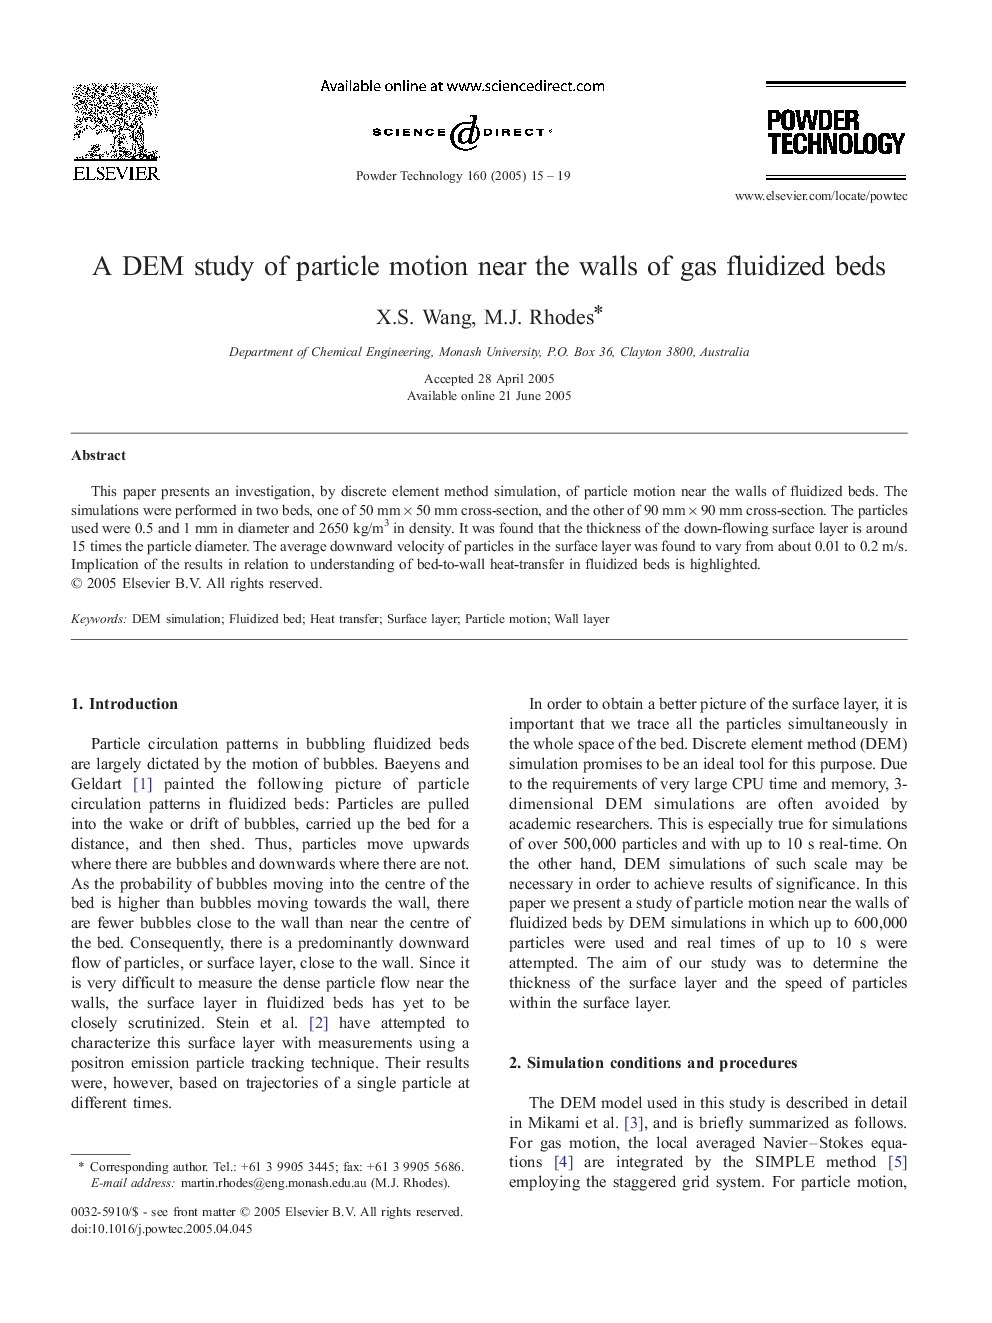 A DEM study of particle motion near the walls of gas fluidized beds